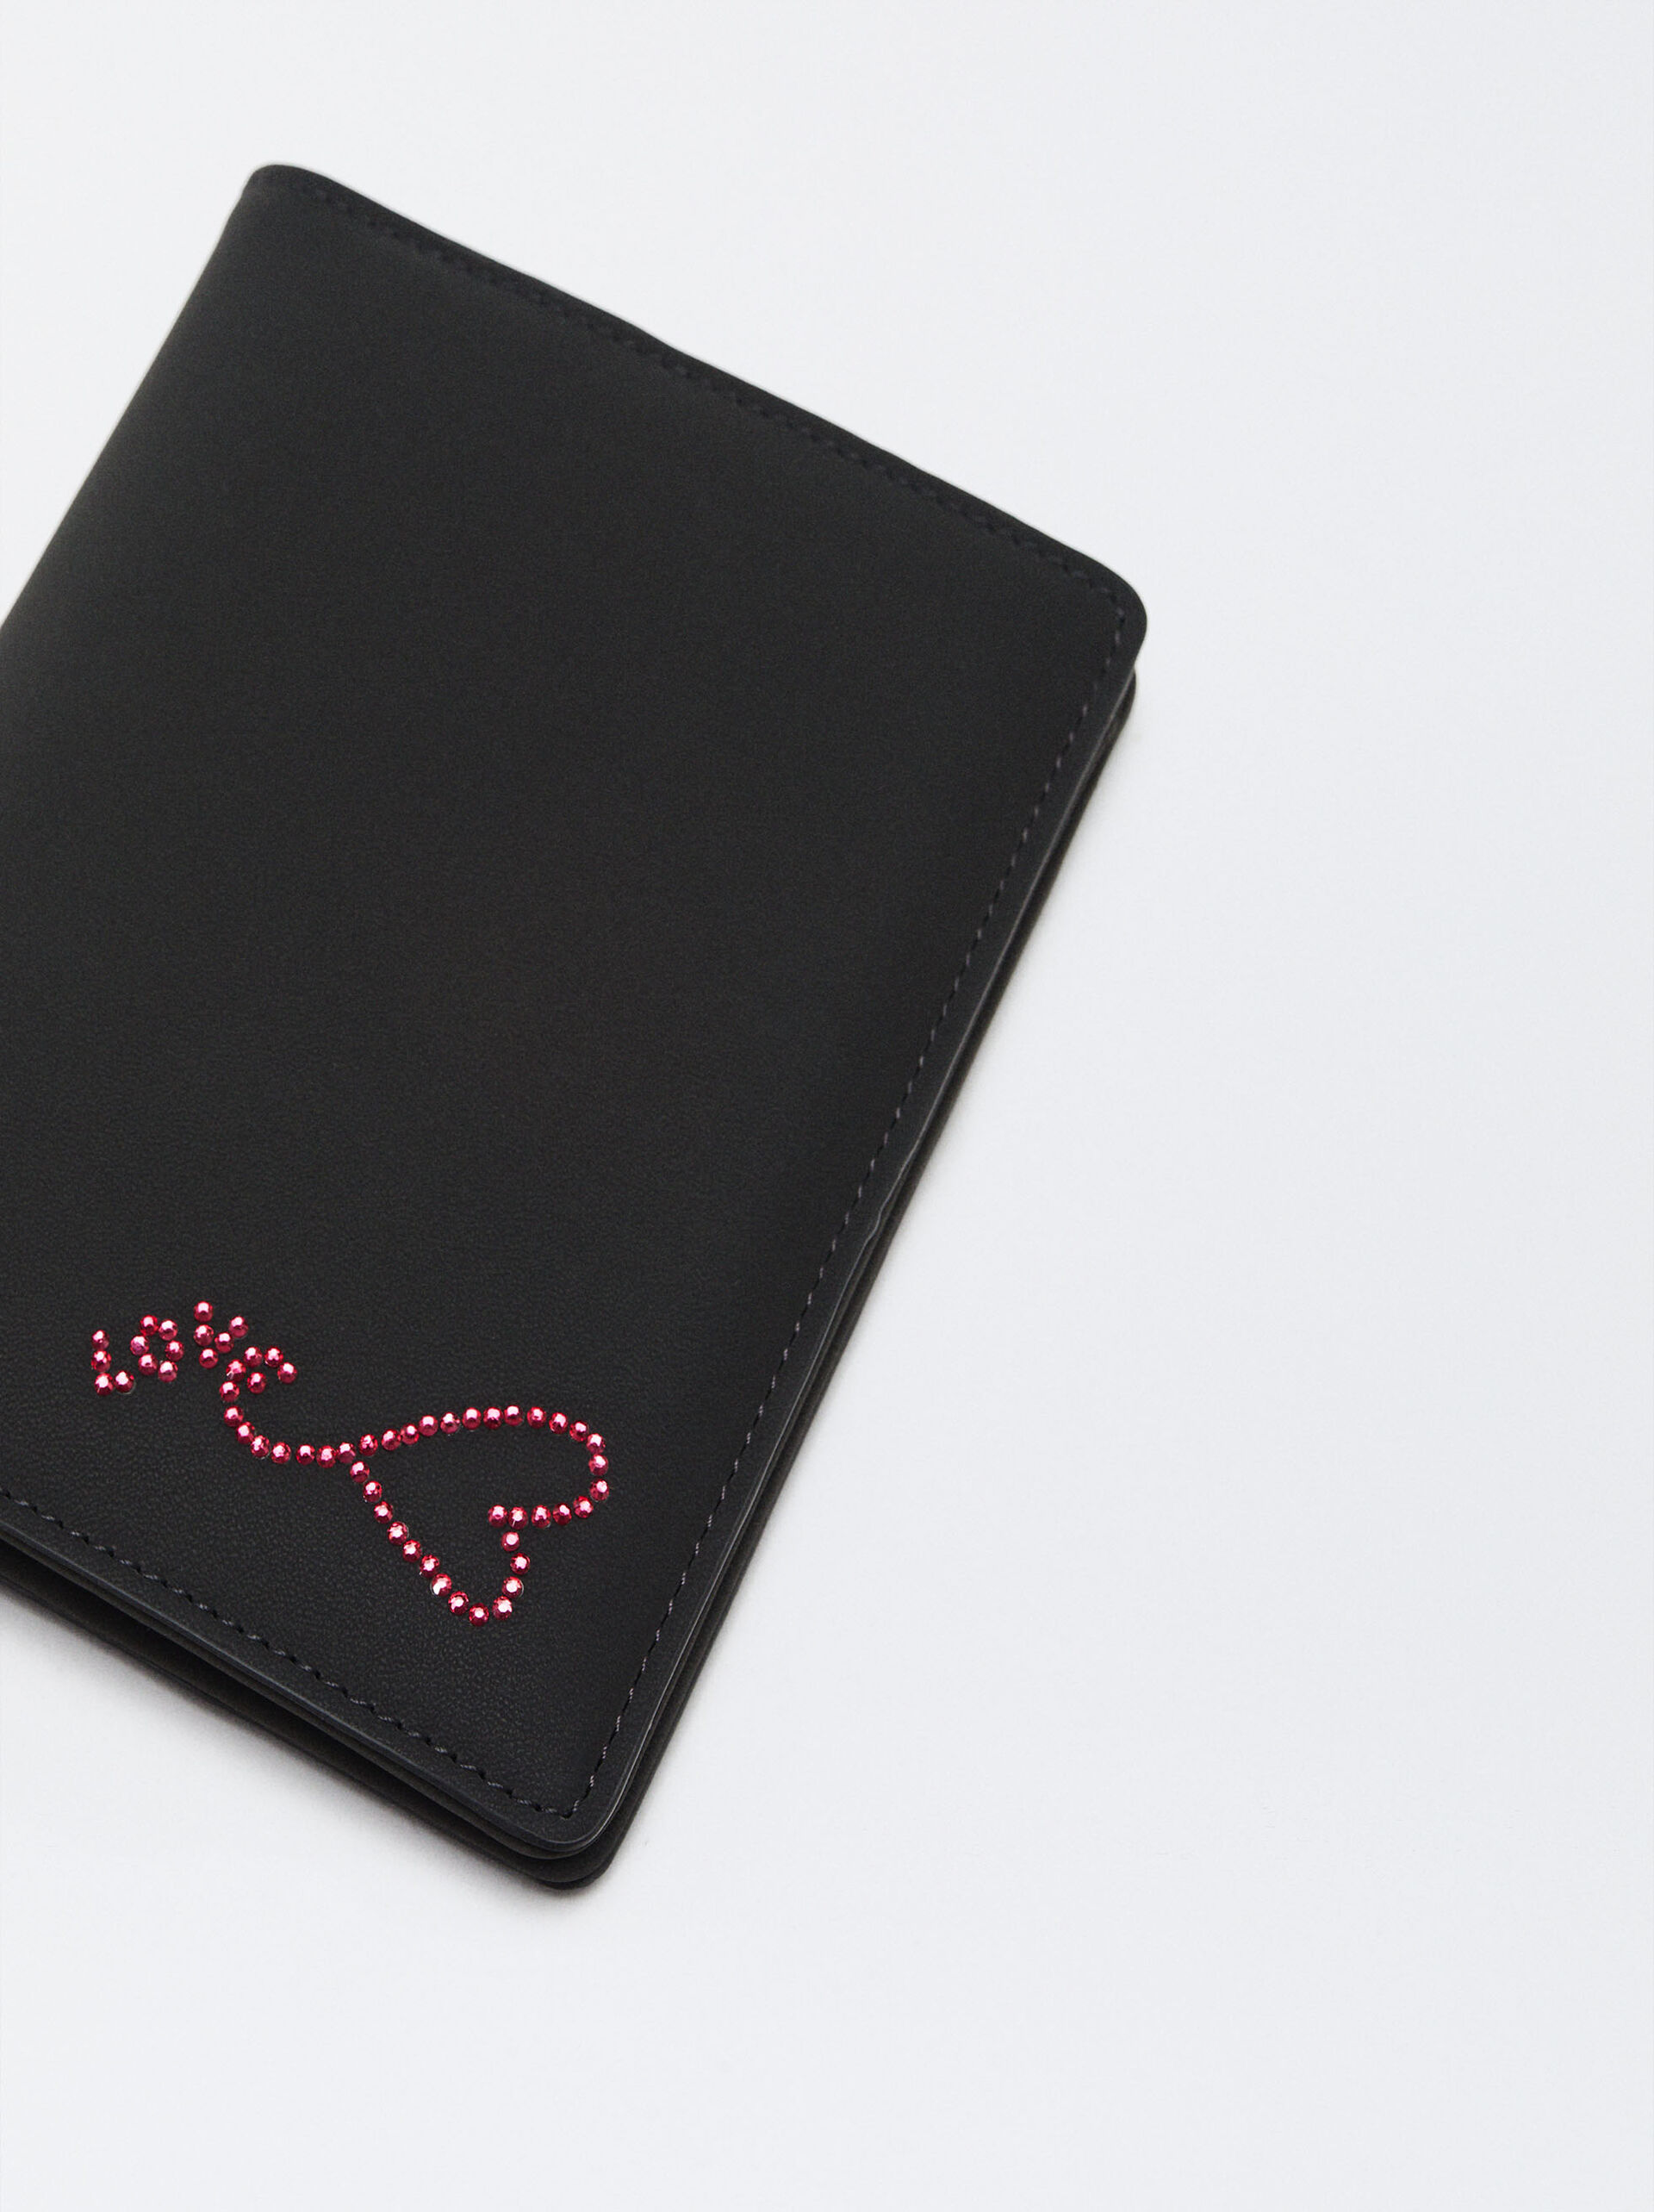 Passport Cover With Heart image number 1.0